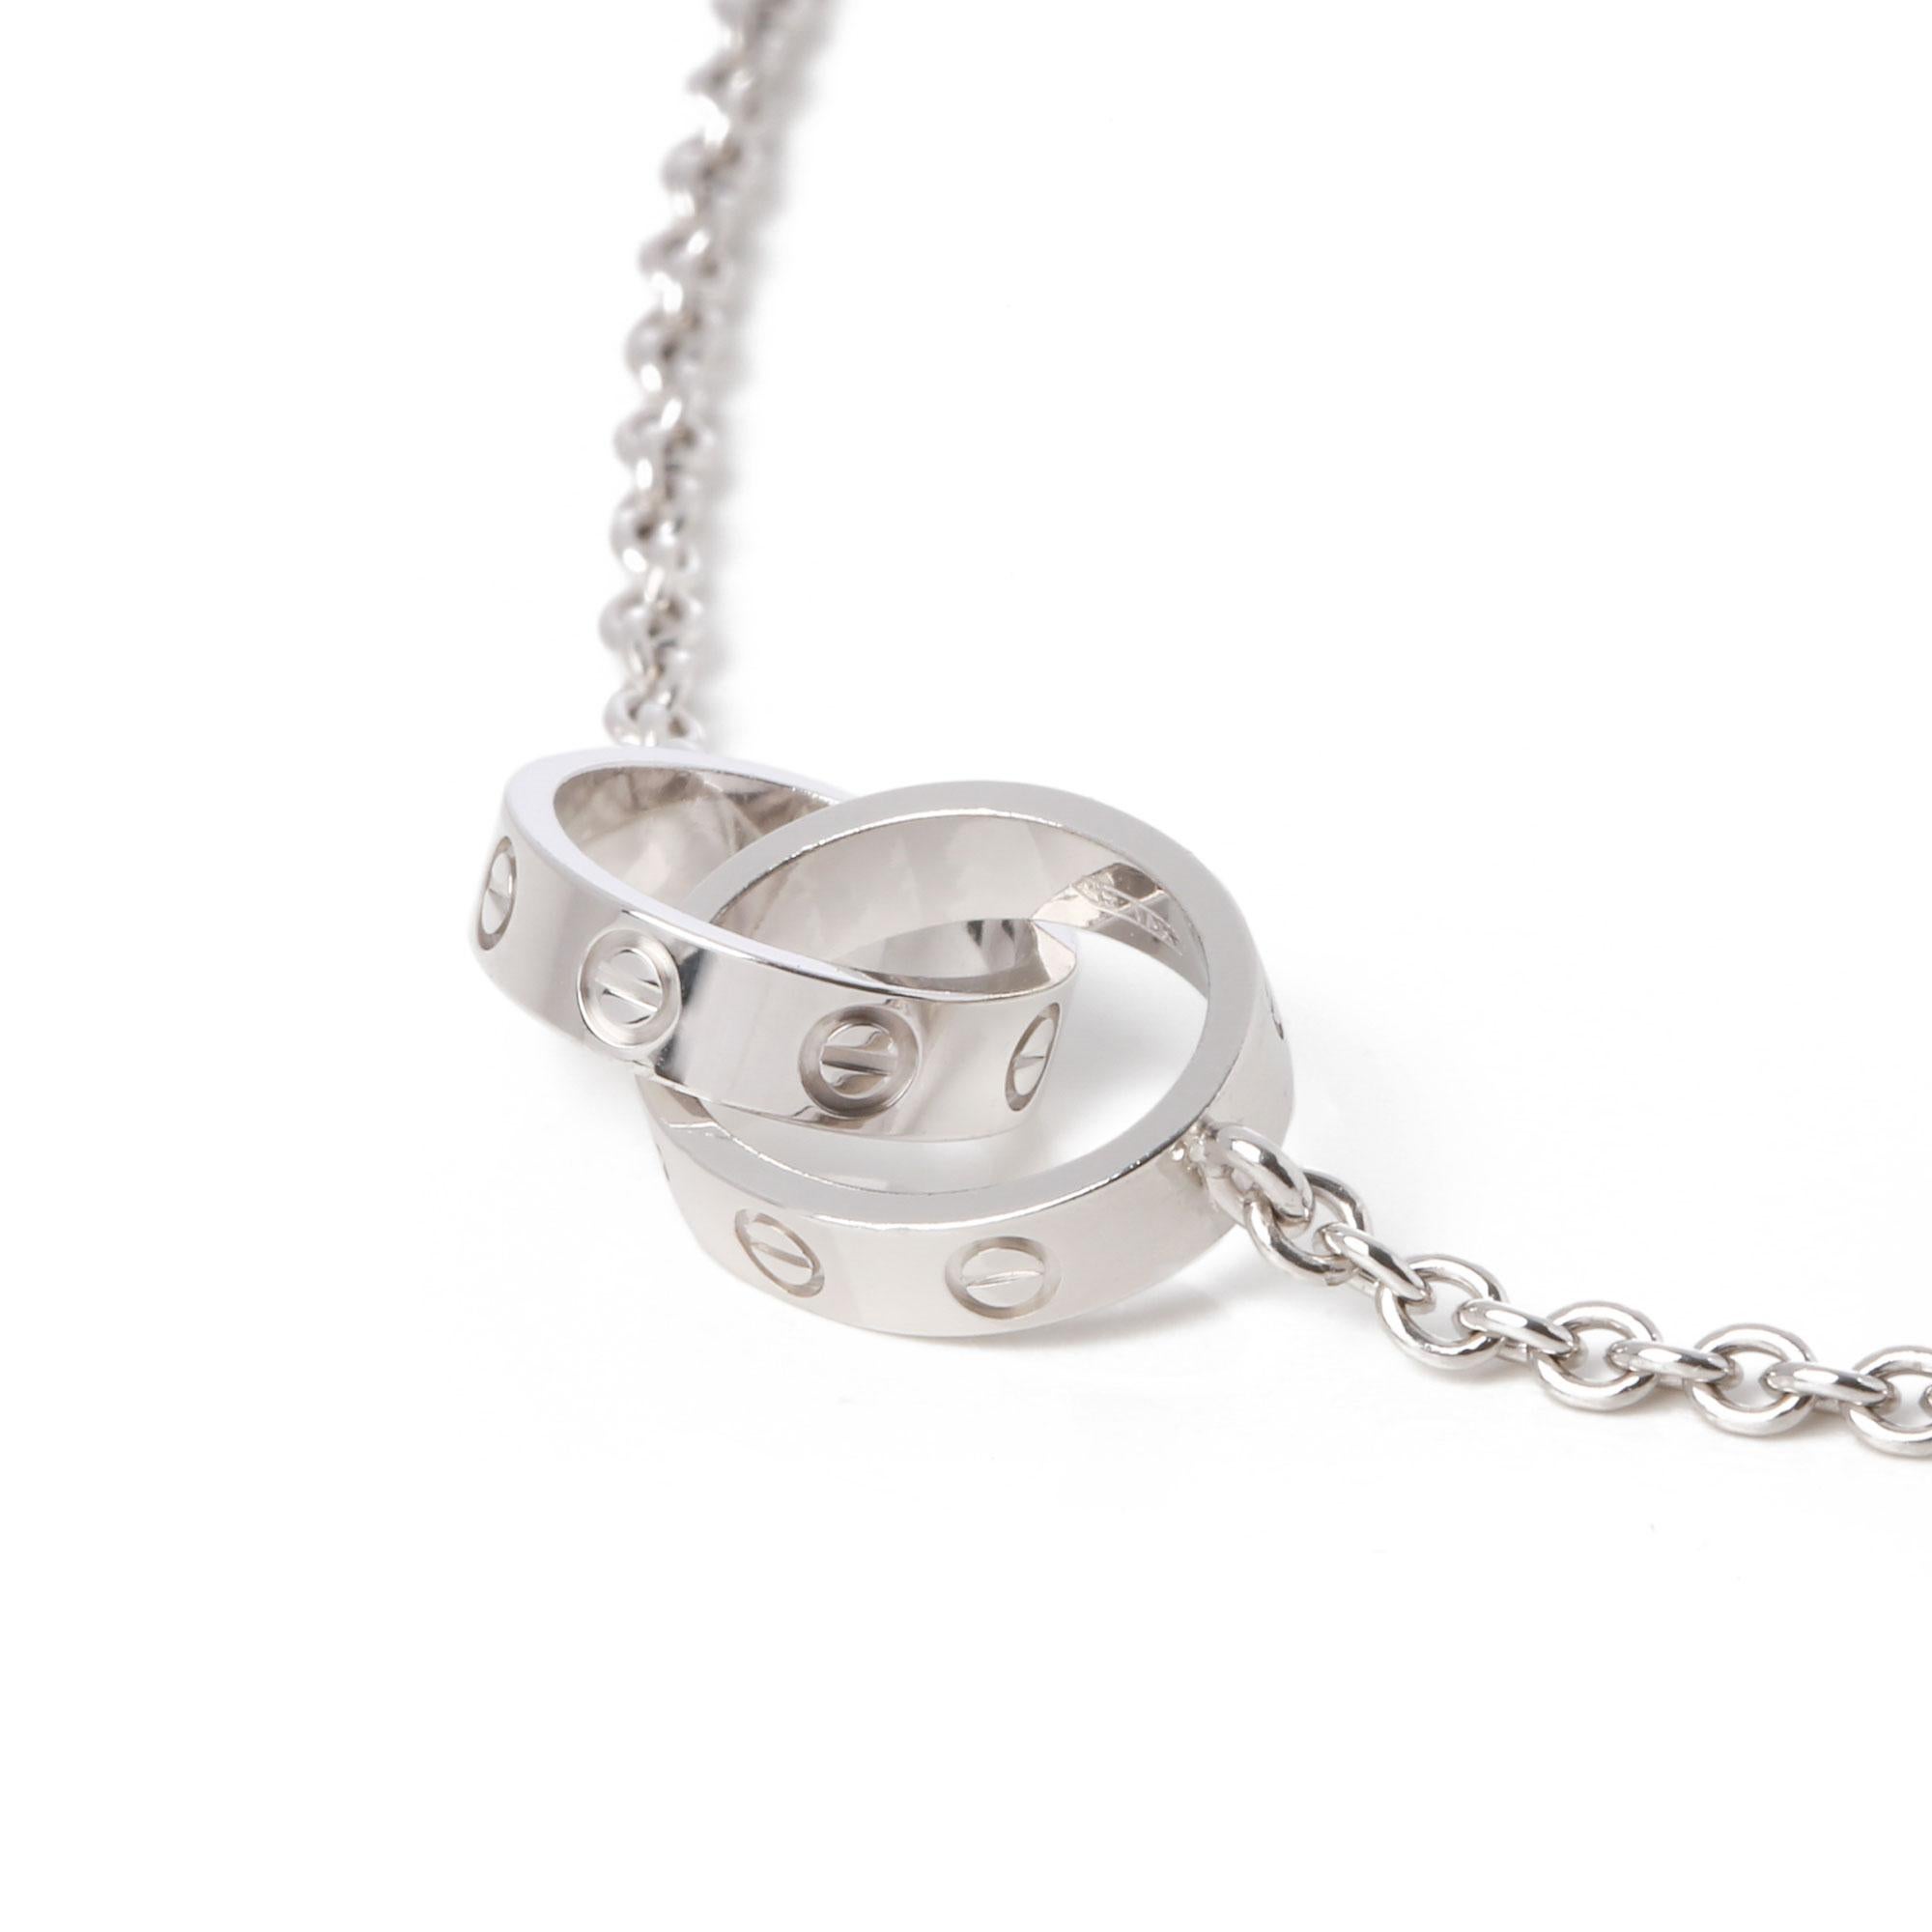 This necklace by Cartier is from their Love collection and features two interlinking pendants with their iconic screw detailing, set in 18ct white gold. Accompanied with a Xupes presentation box. Our Xupes reference is COMJ563 should you need to